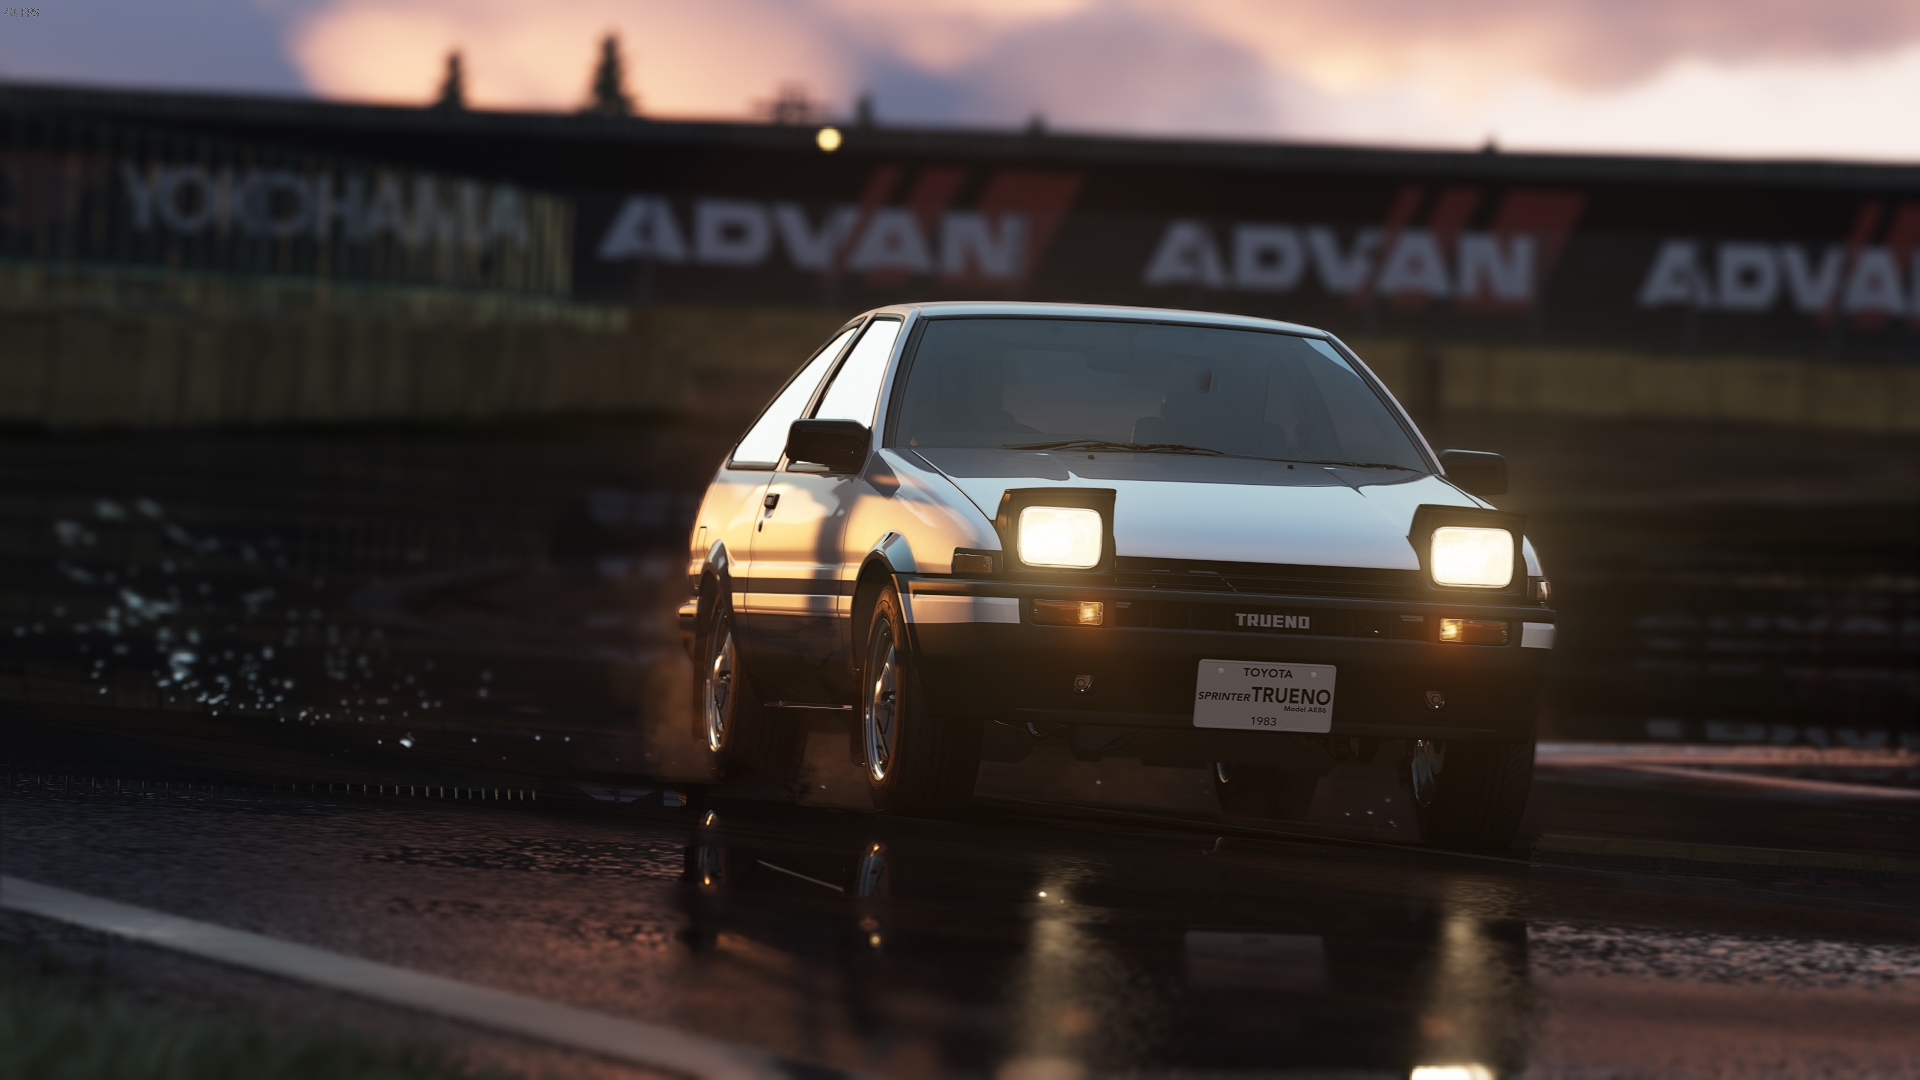 toyota ae86 toyota car ae86 japanese cars wallpaper - Coolwallpapers.me!